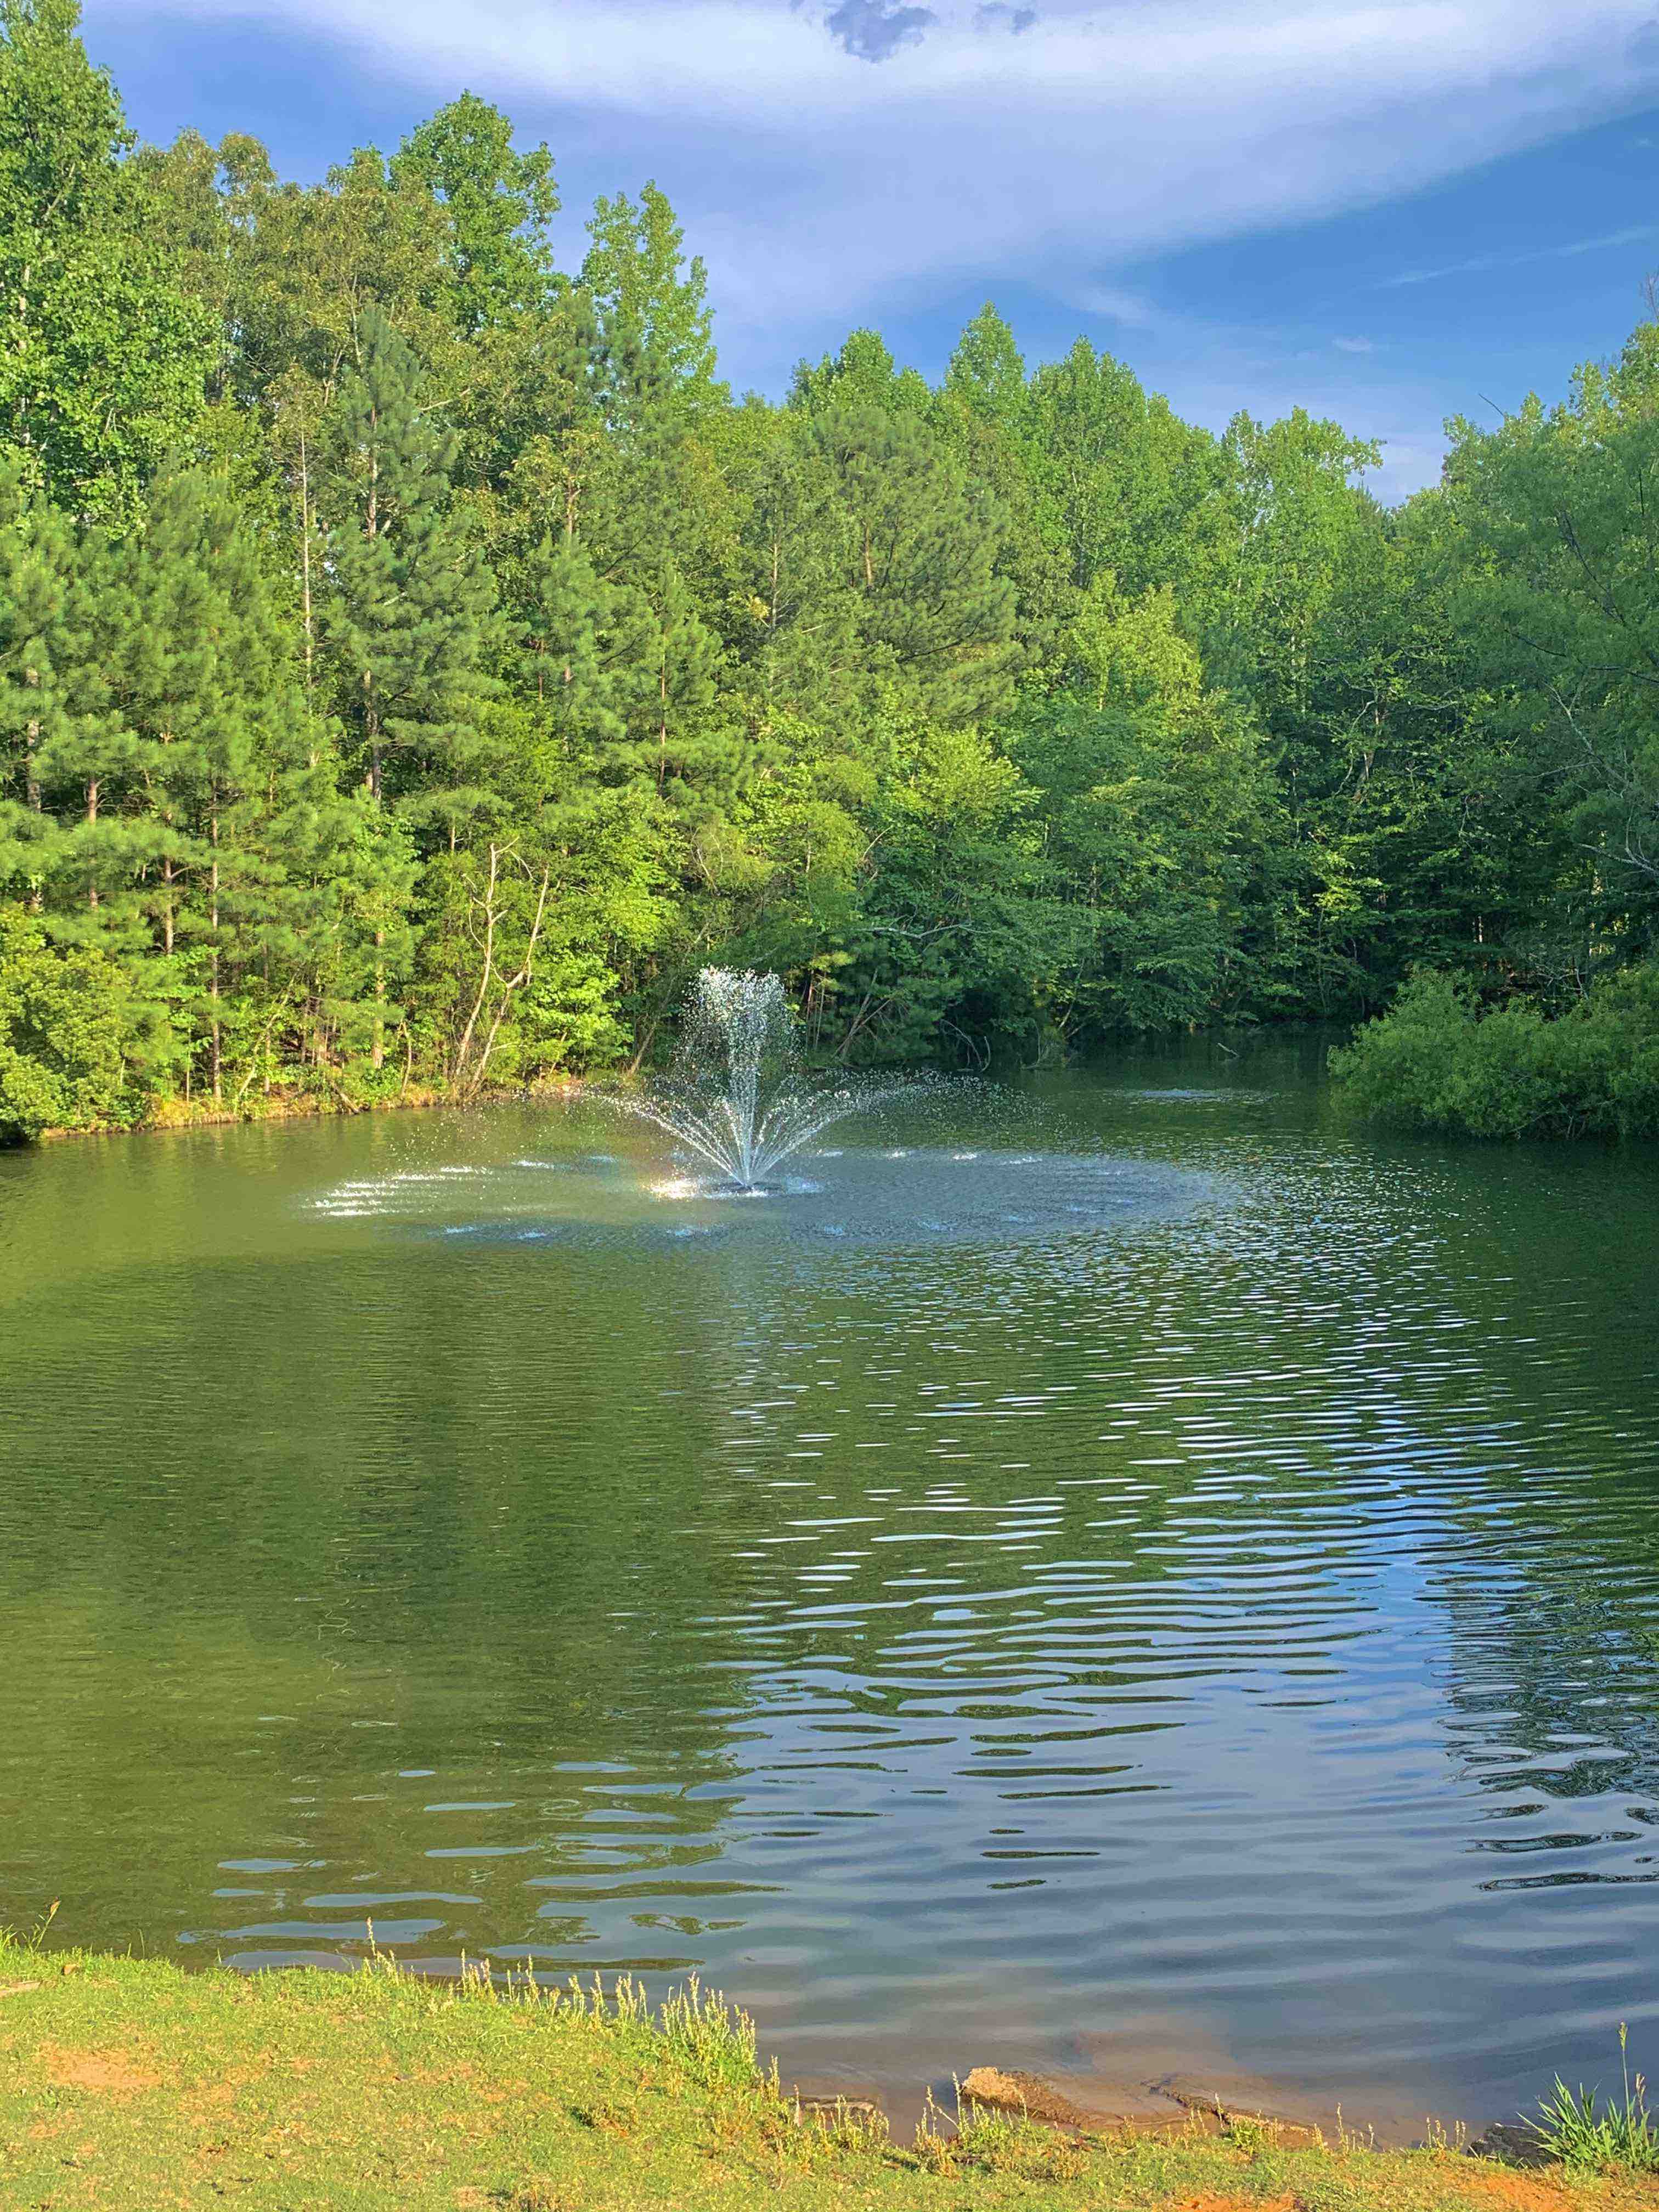 A fountain in the middle of a lake. The lake is surrounded by trees.